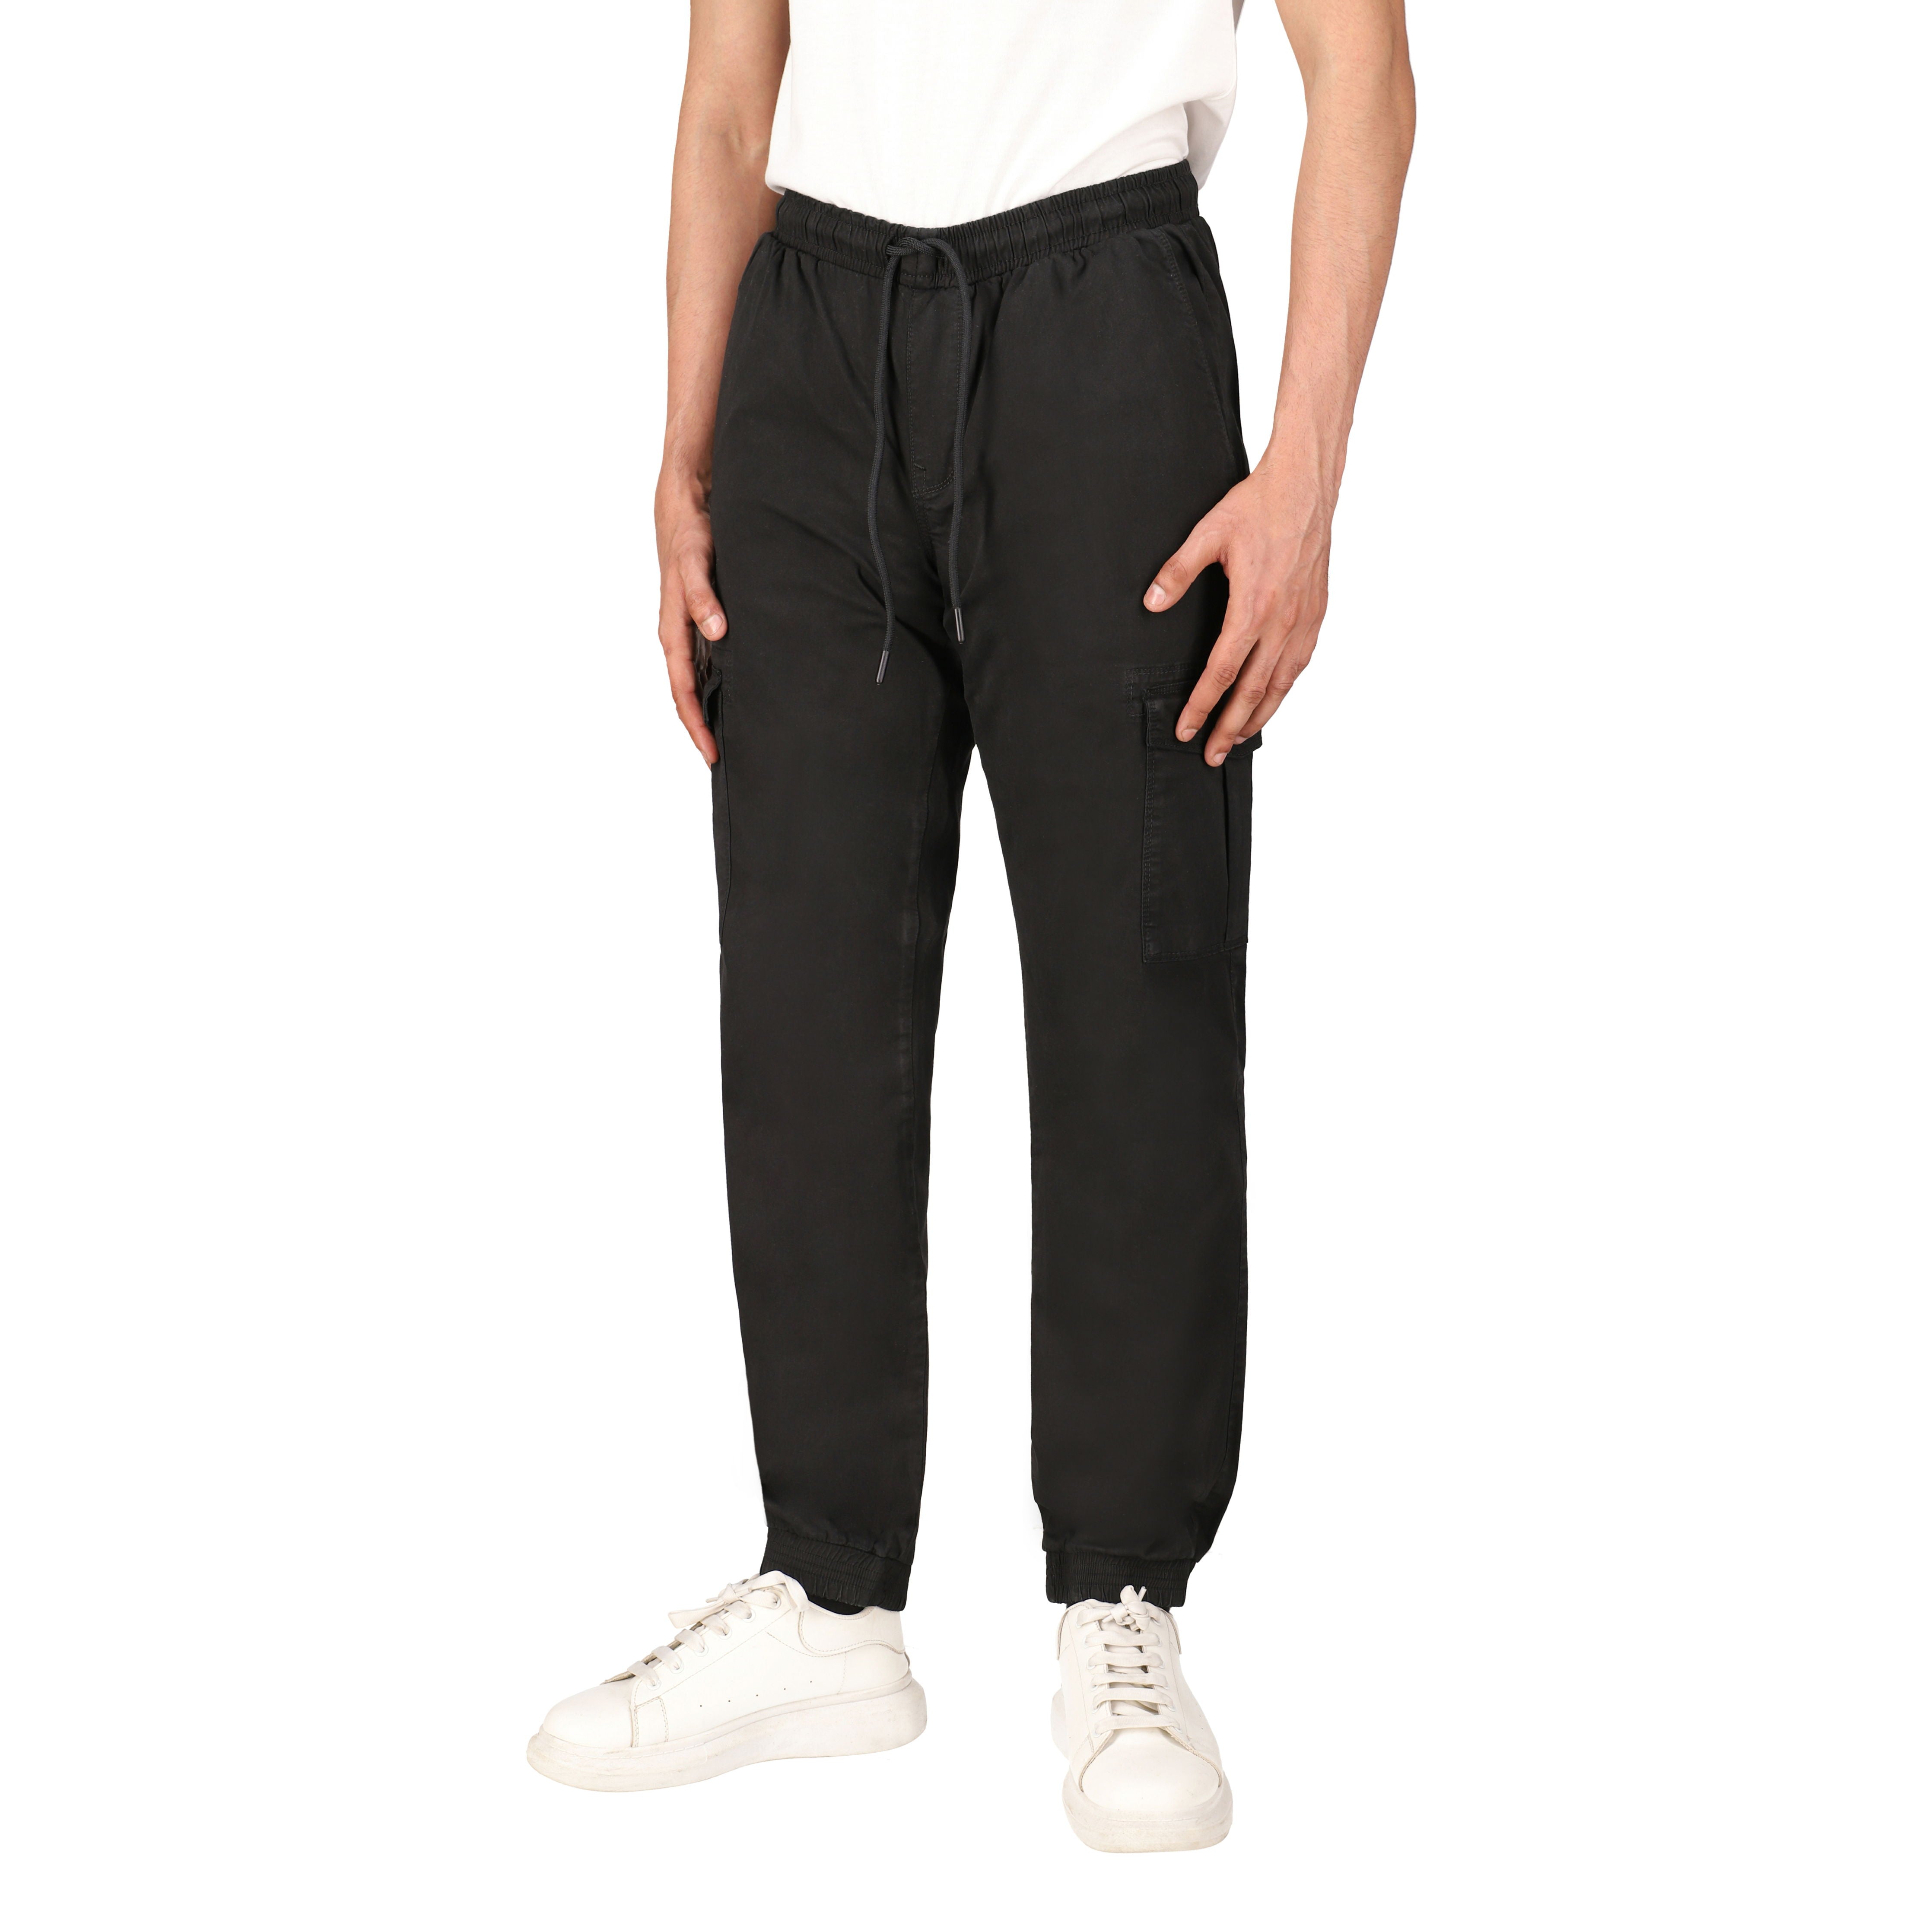 Get the Trendy and Functional D Unisex Cargo Pants at a steal - Save u